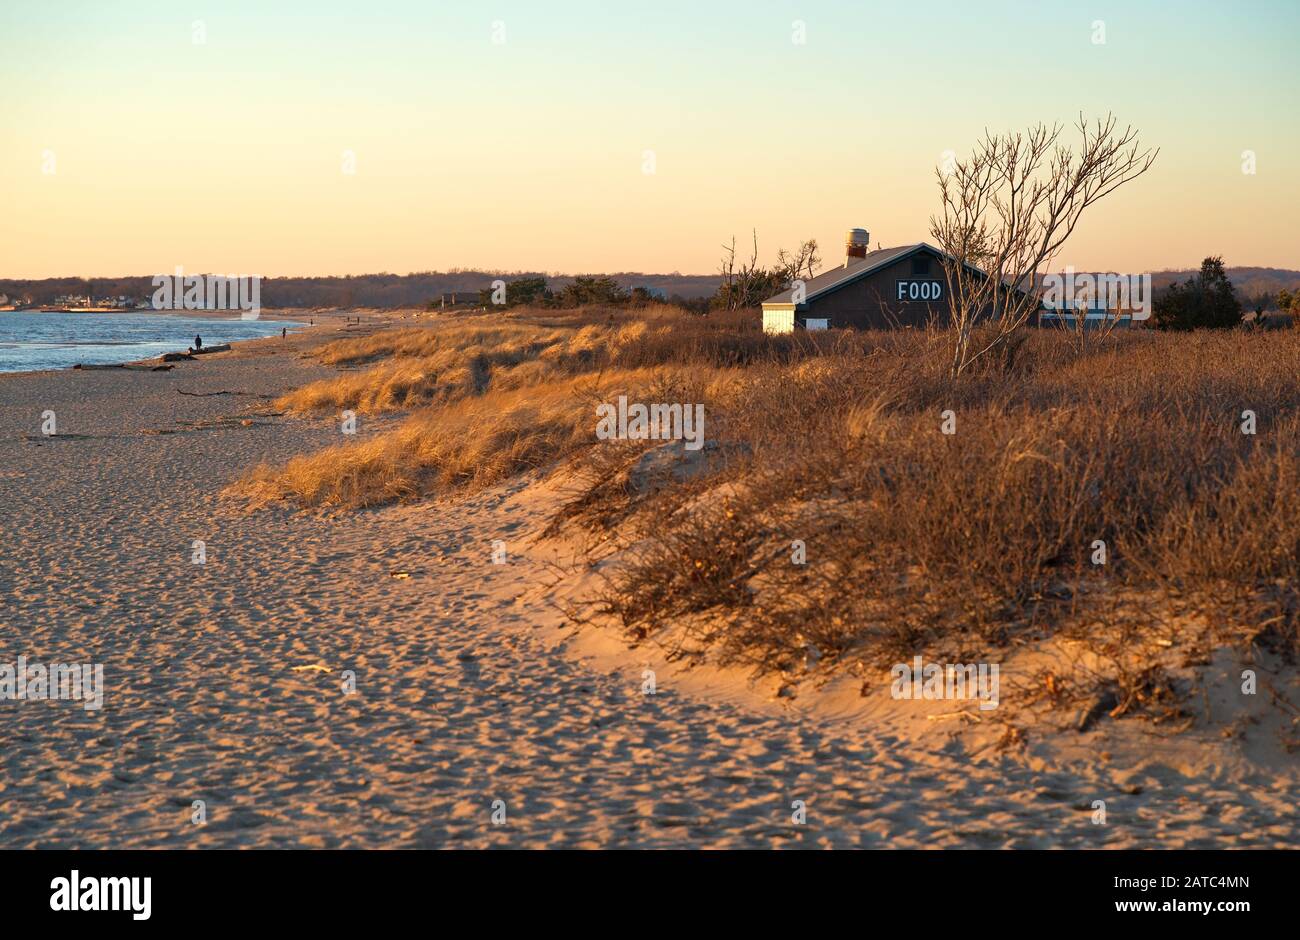 Madison, CT USA. Feb 2019. New England beach restaurant closed during winter season with people in background walking by the chilly afternoon shore. Stock Photo